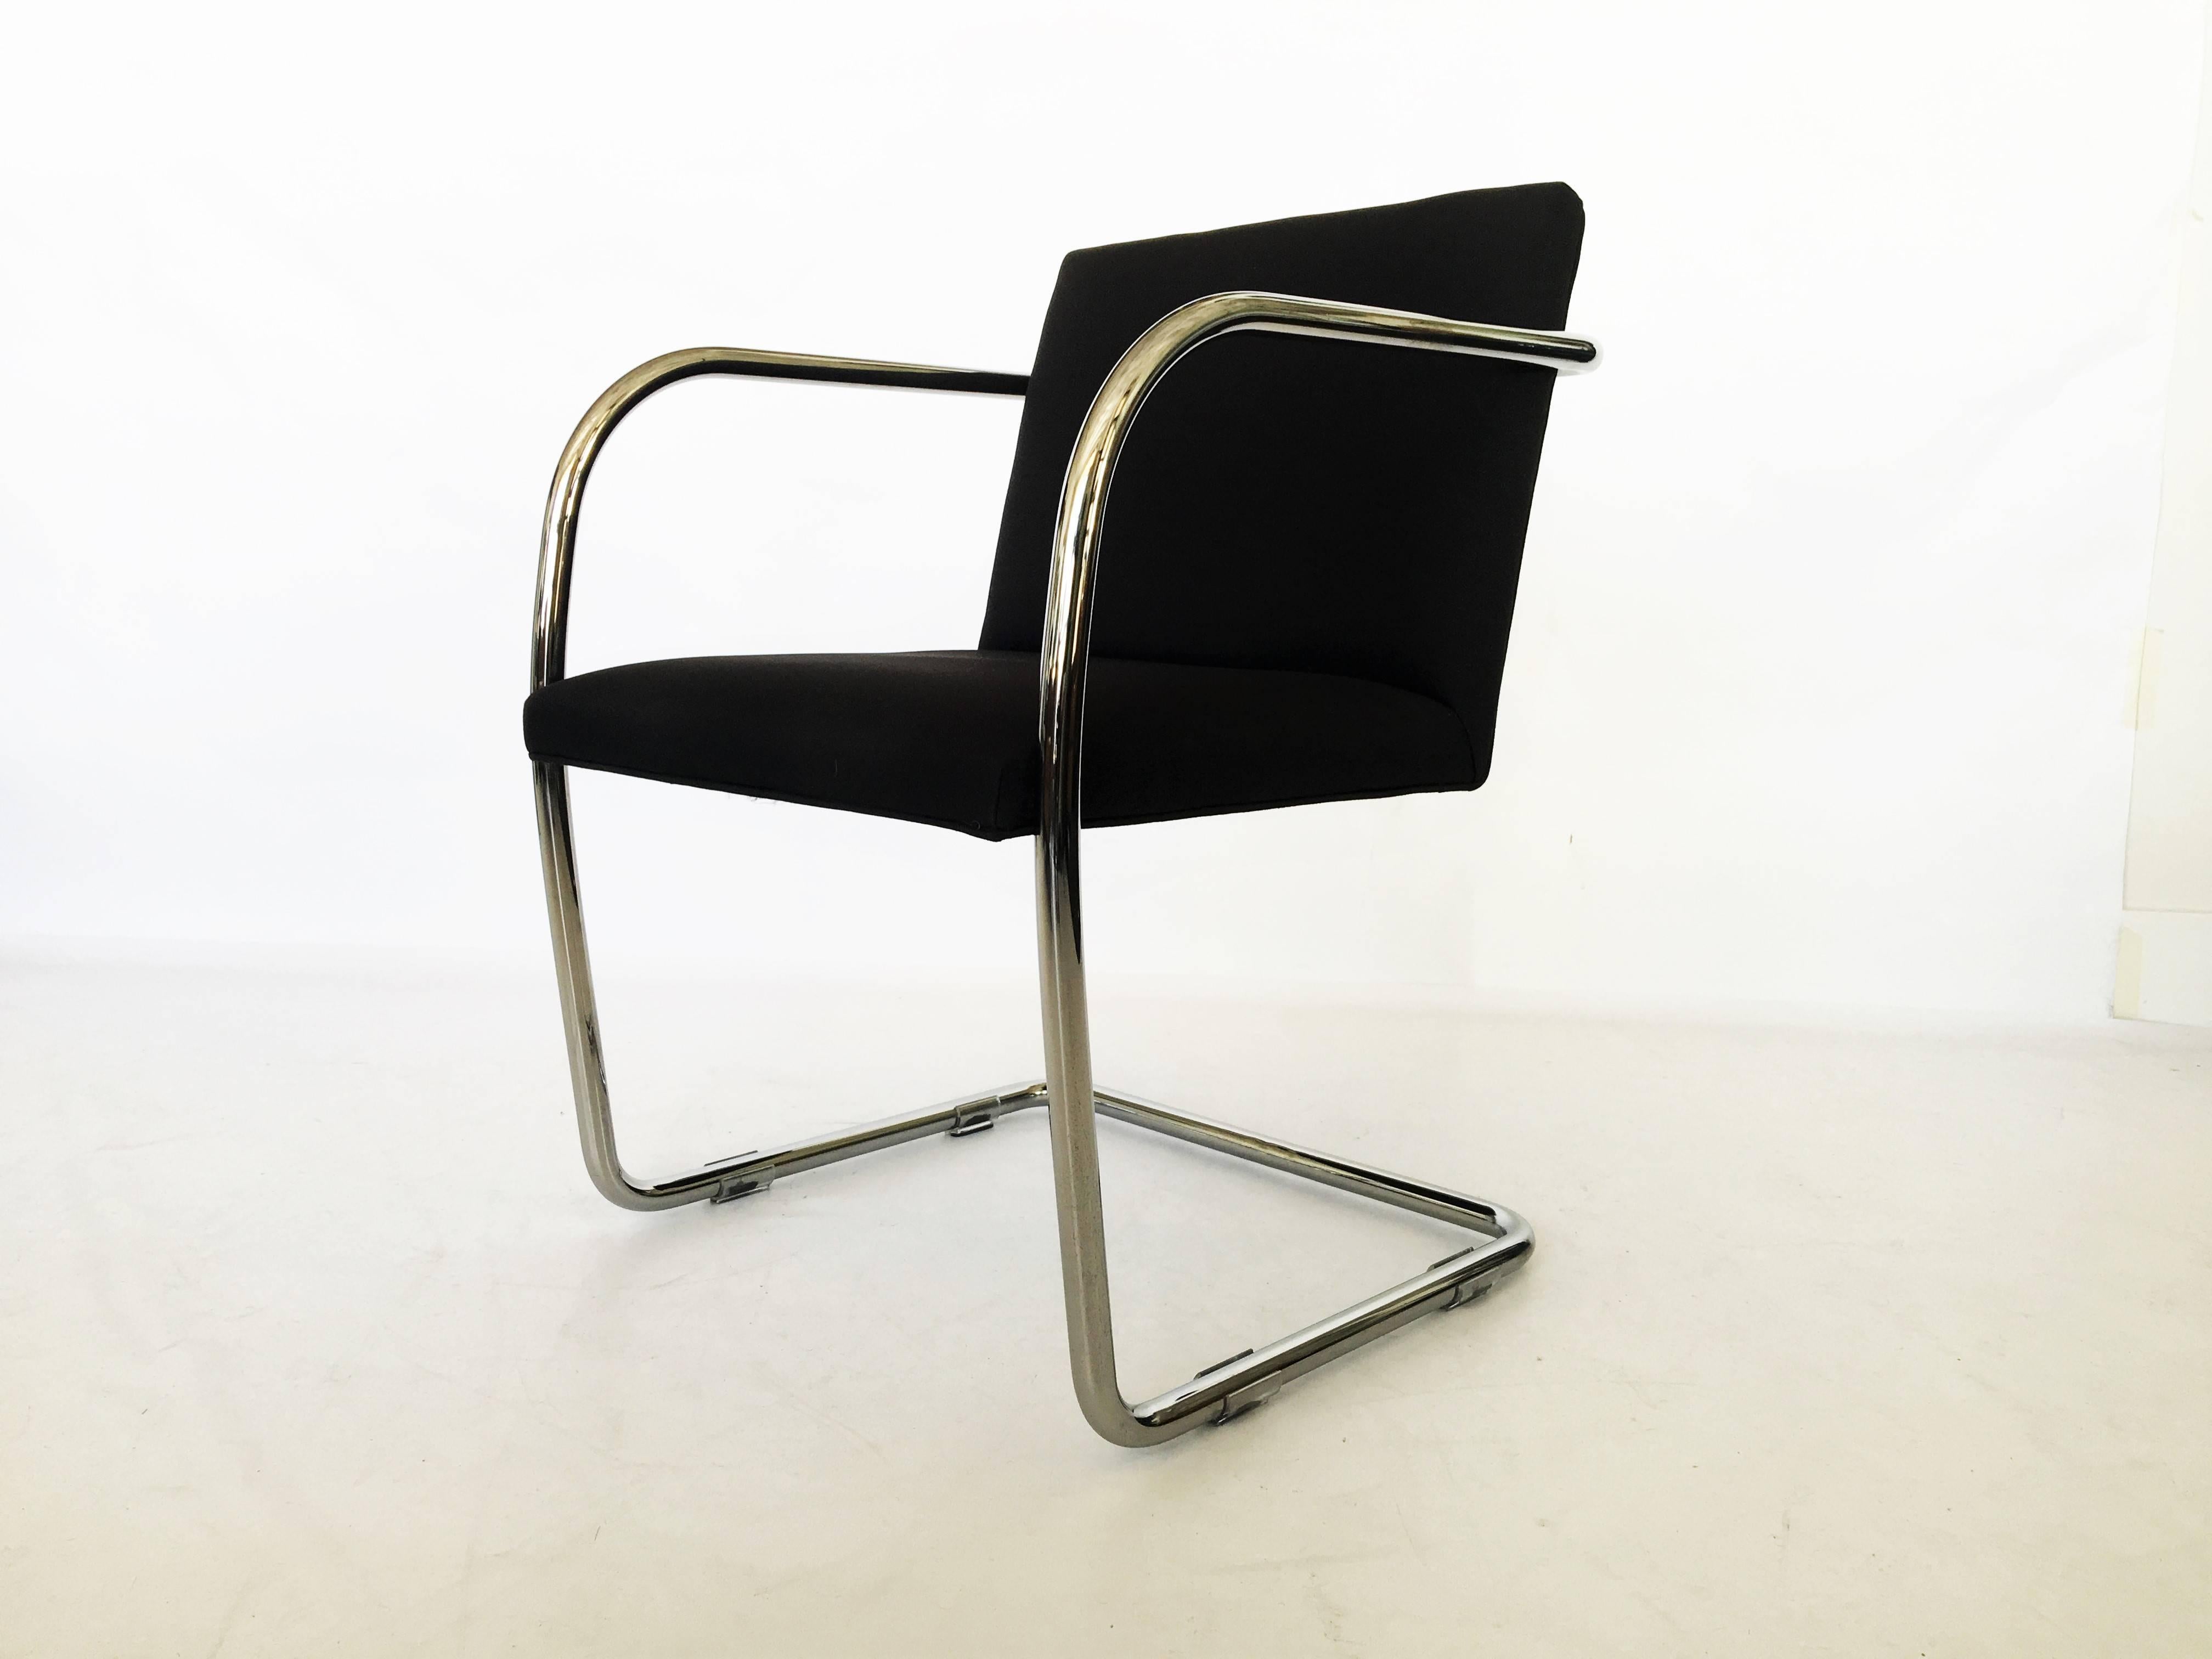 Pair of Thonet Mies van der Rohe Brno Chairs In Excellent Condition For Sale In Dallas, TX